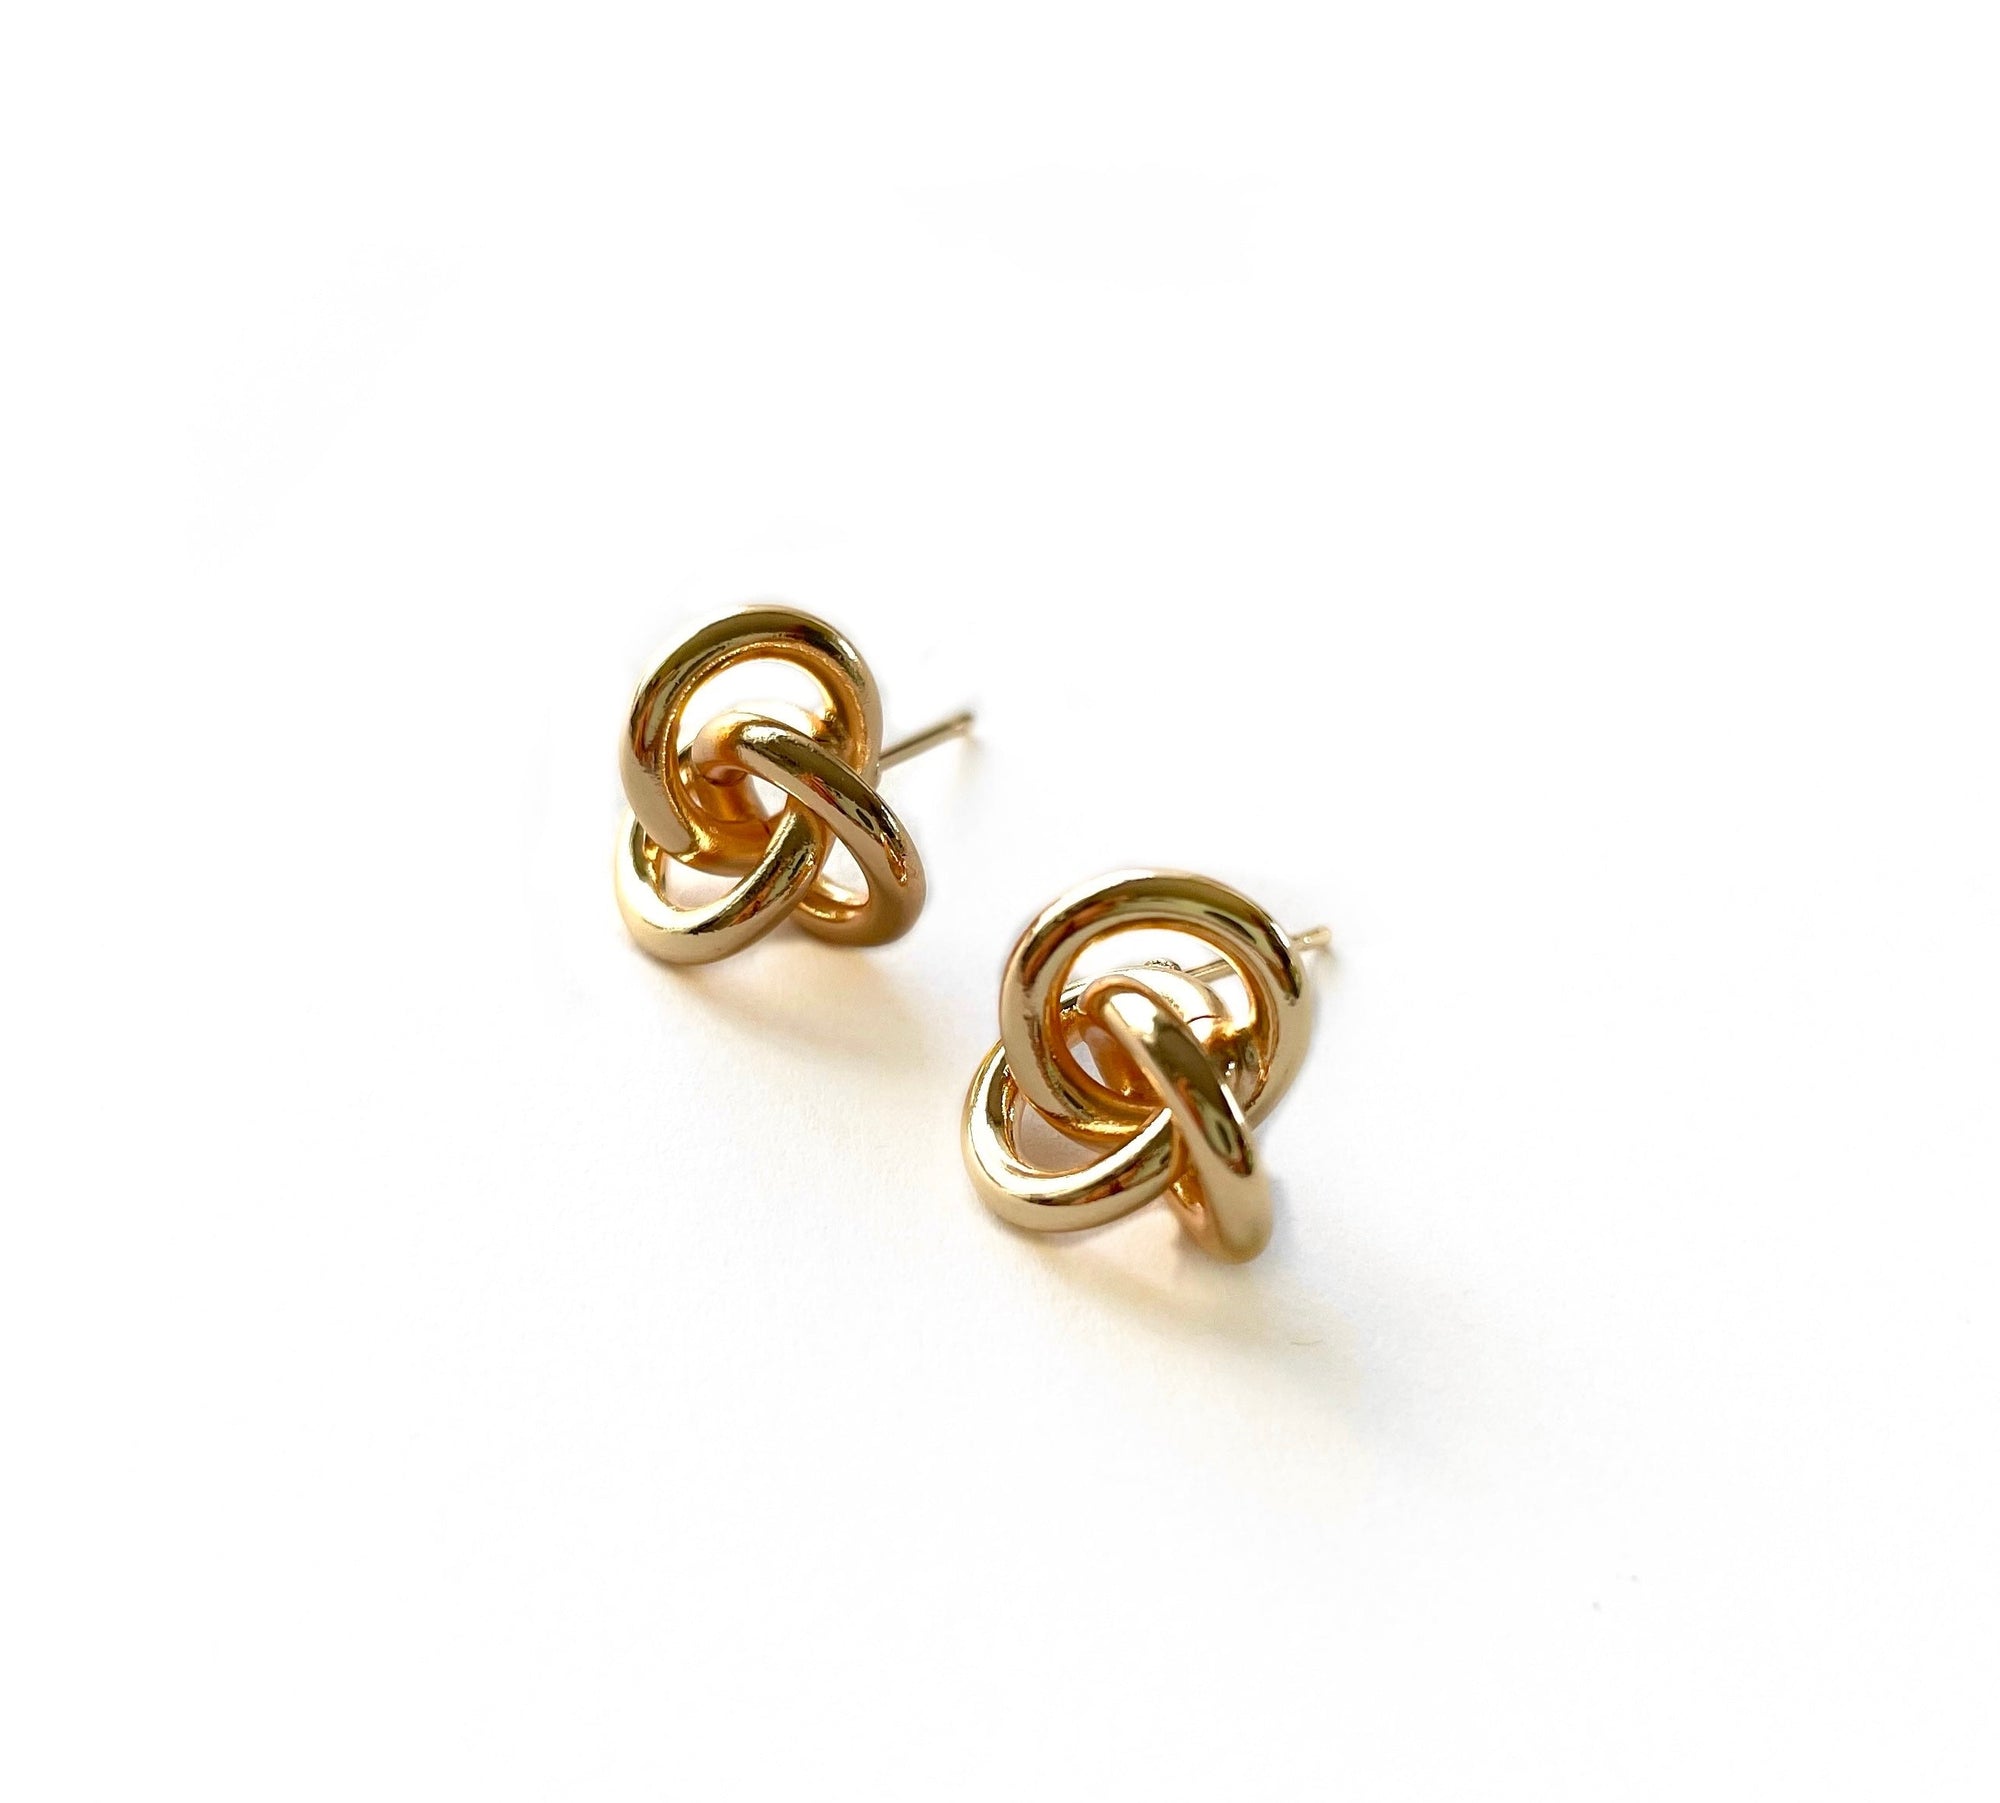 small knot stud earring in a shiny gold finish